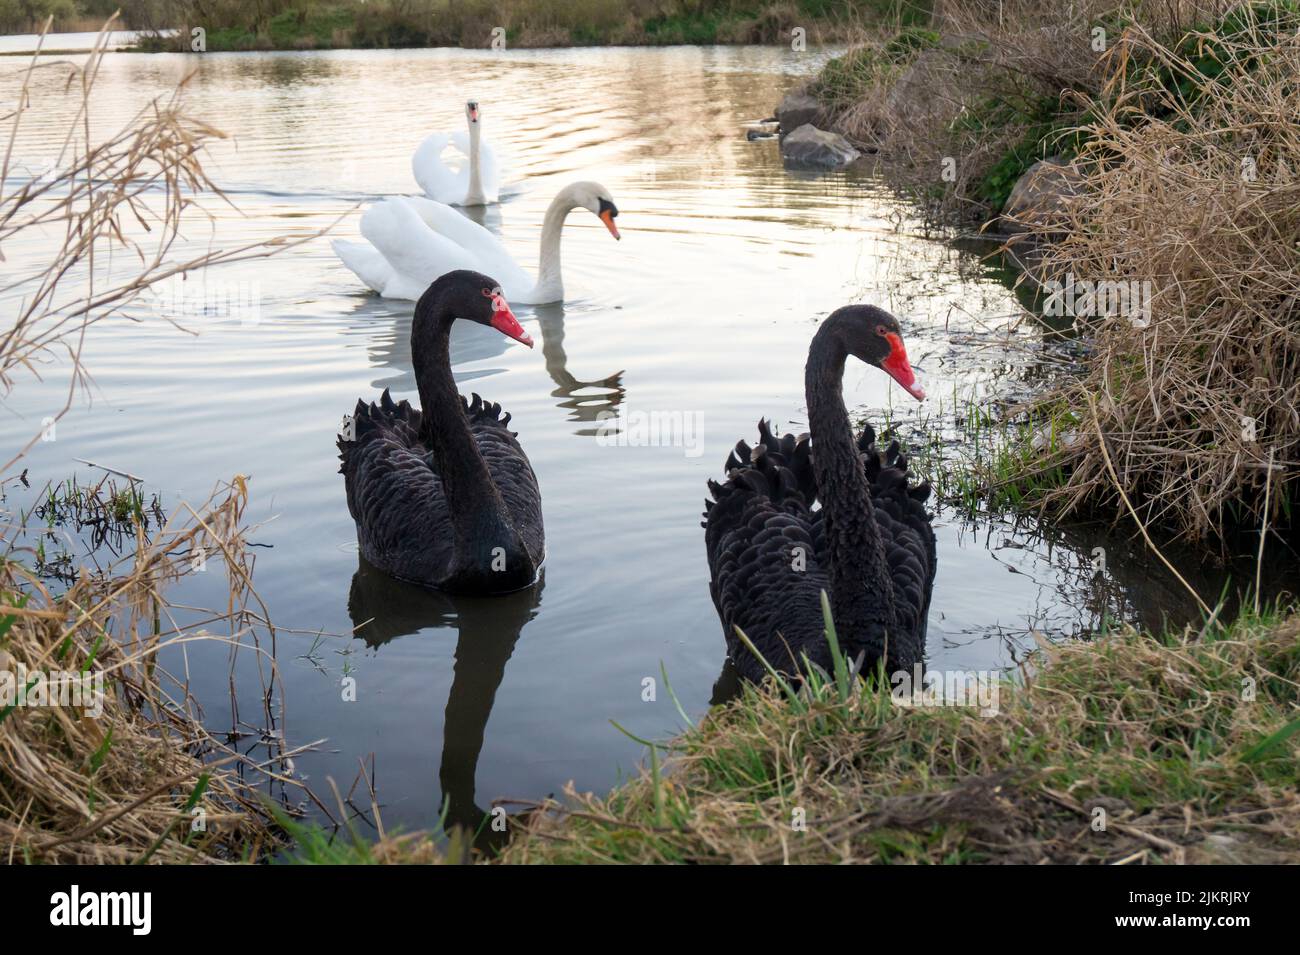 Black and white swans together. Two couples of swans swimming in a pond. Cygnus atratus and Cygnus olor. Stock Photo